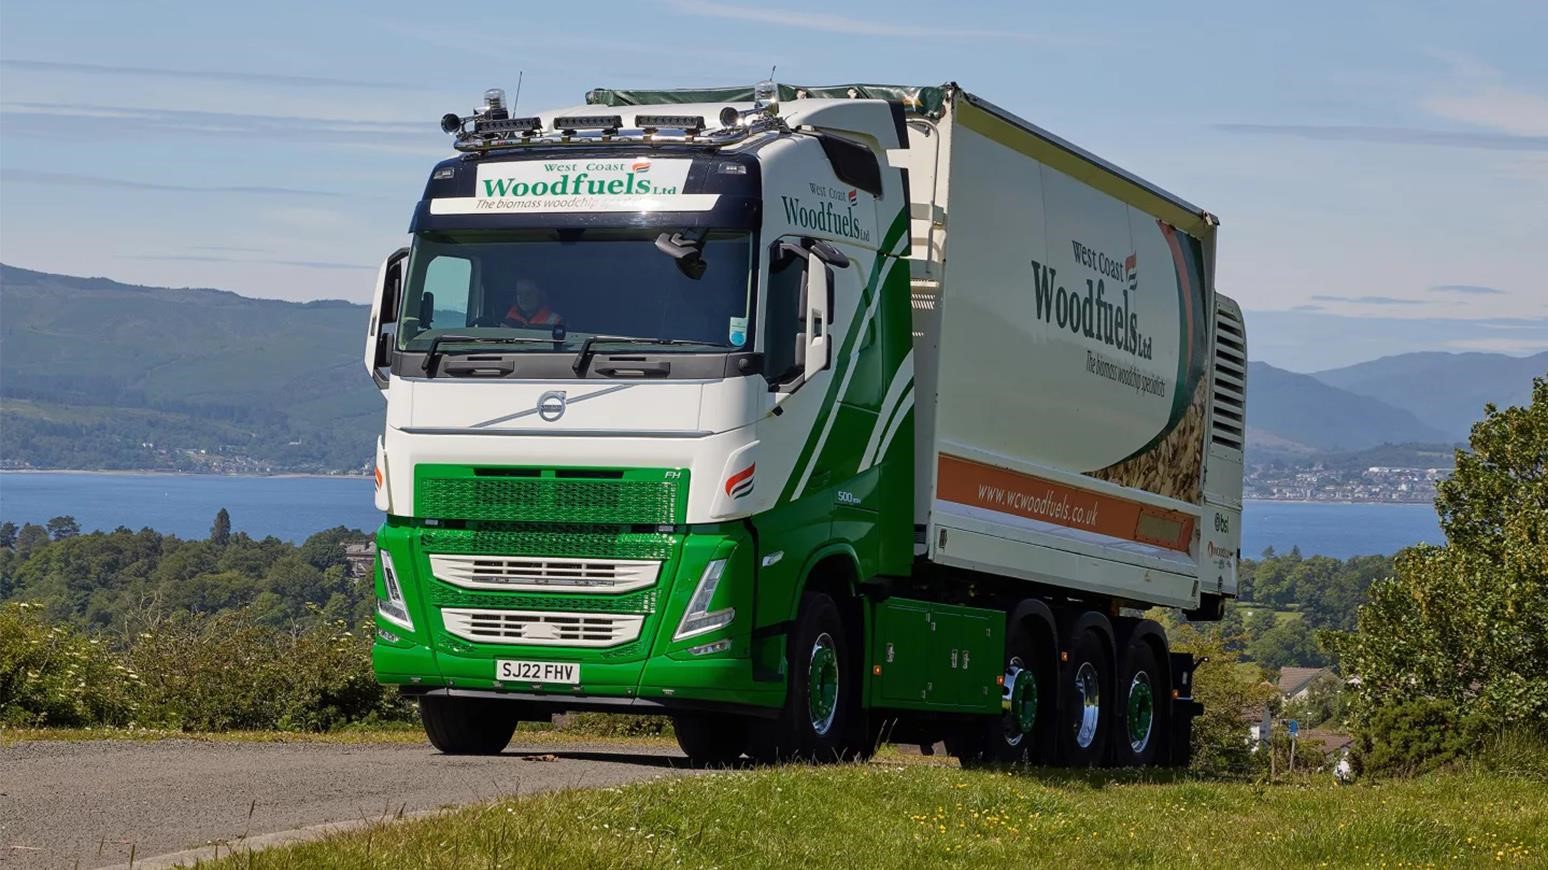 Volvo FH 500 With Tridem Increases Manoeuvrability & Payload Capacity For West Coast Woodfuels